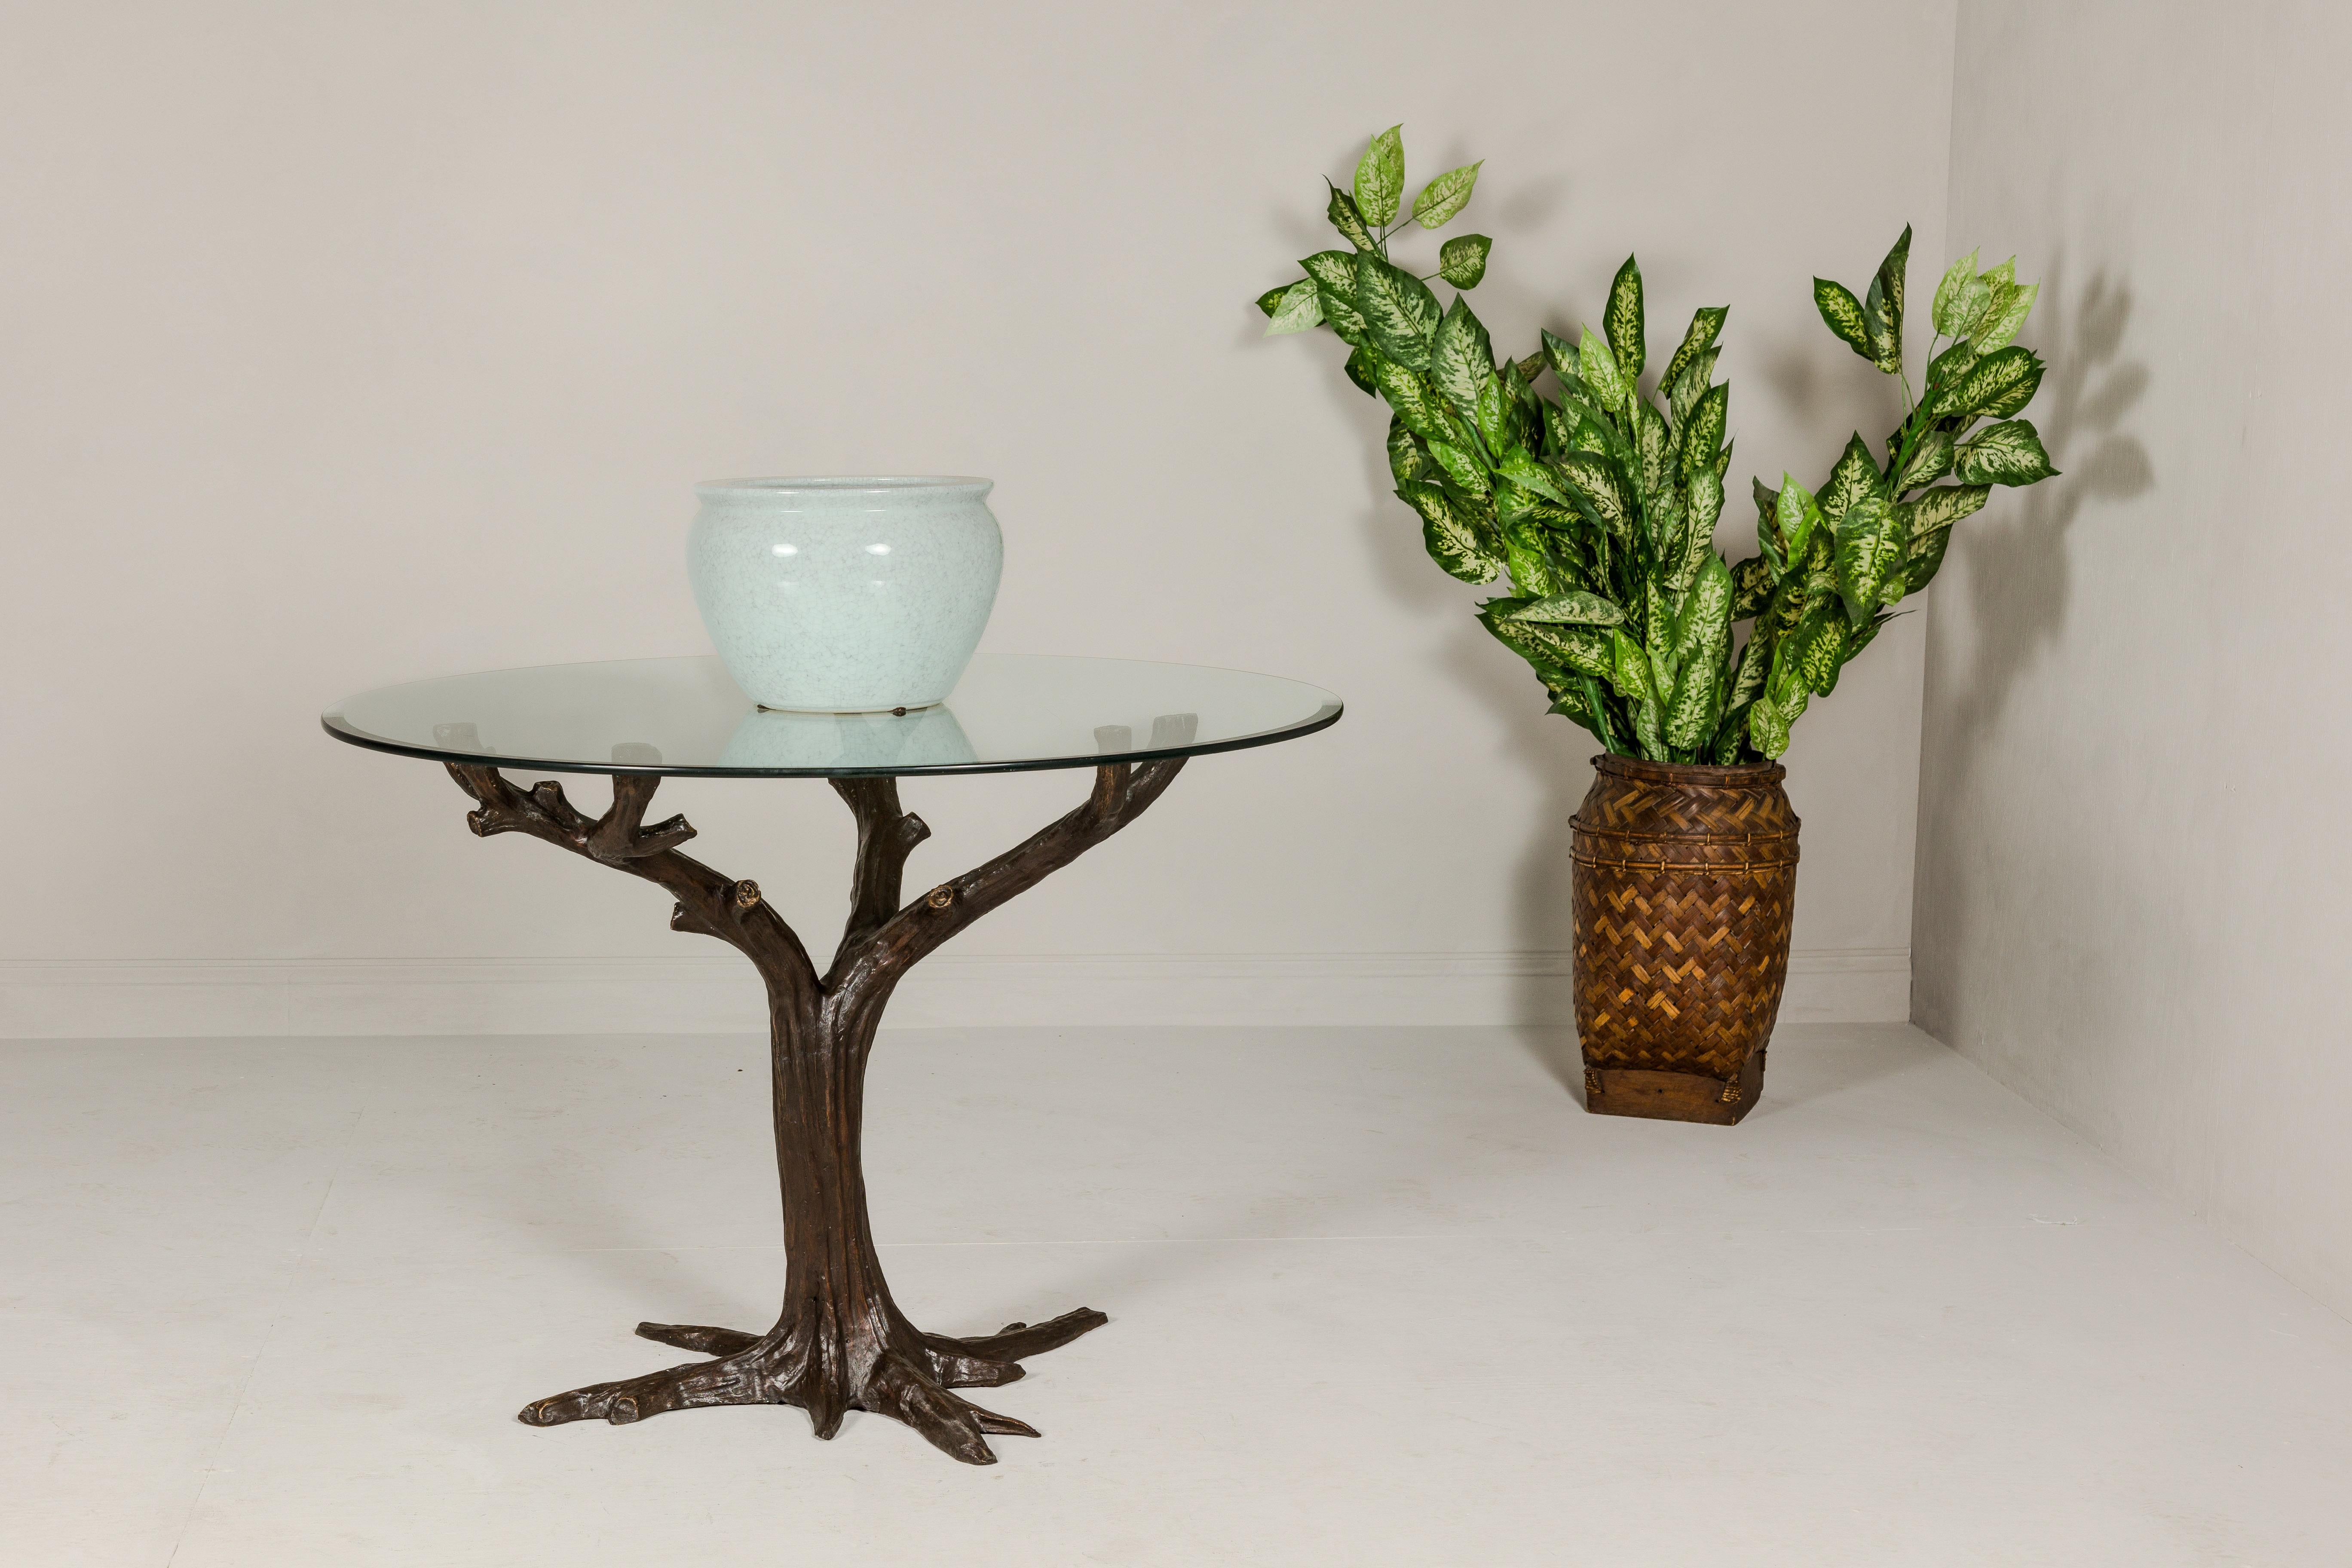 This contemporary bronze tree table base is a striking fusion of natural inspiration and modern artistry. Currently in production with a lead time of 20 weeks, it boasts a rich dark brown patina that highlights the intricate details and textures